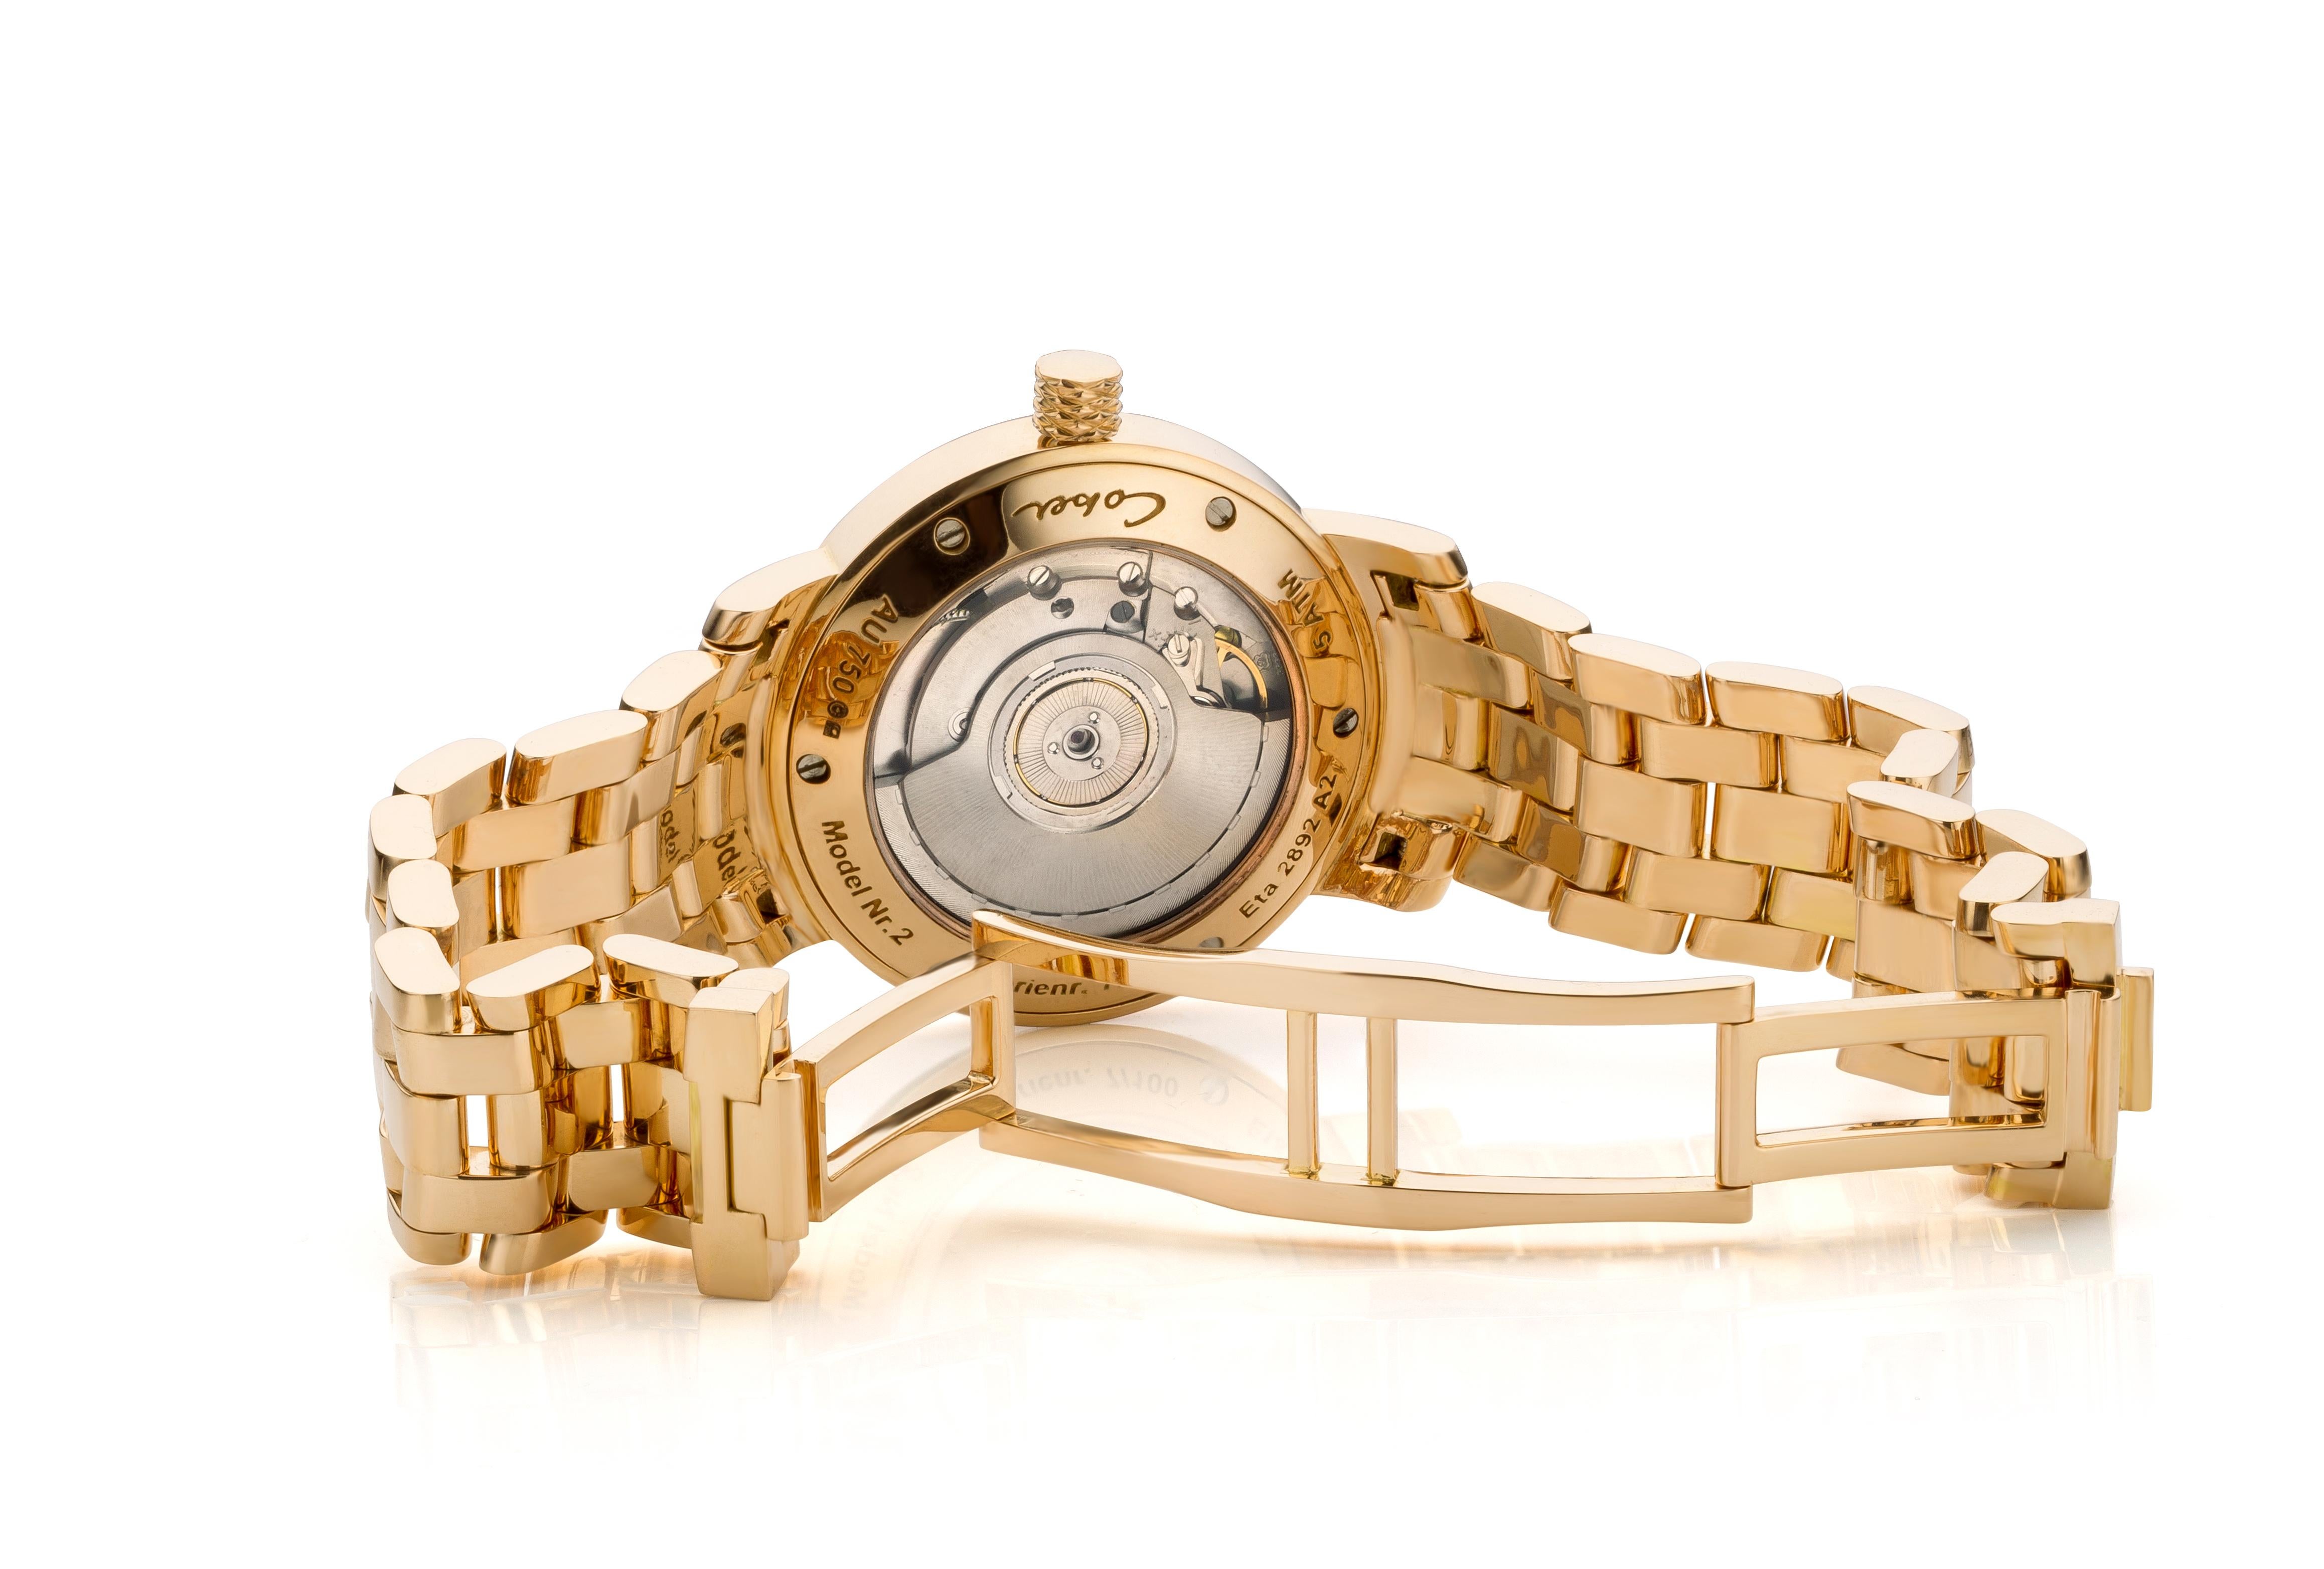 Brilliant Cut Cober “N°2” Ladies automatic Yellow Gold with 60 Diamonds Wristwatch handmade  For Sale